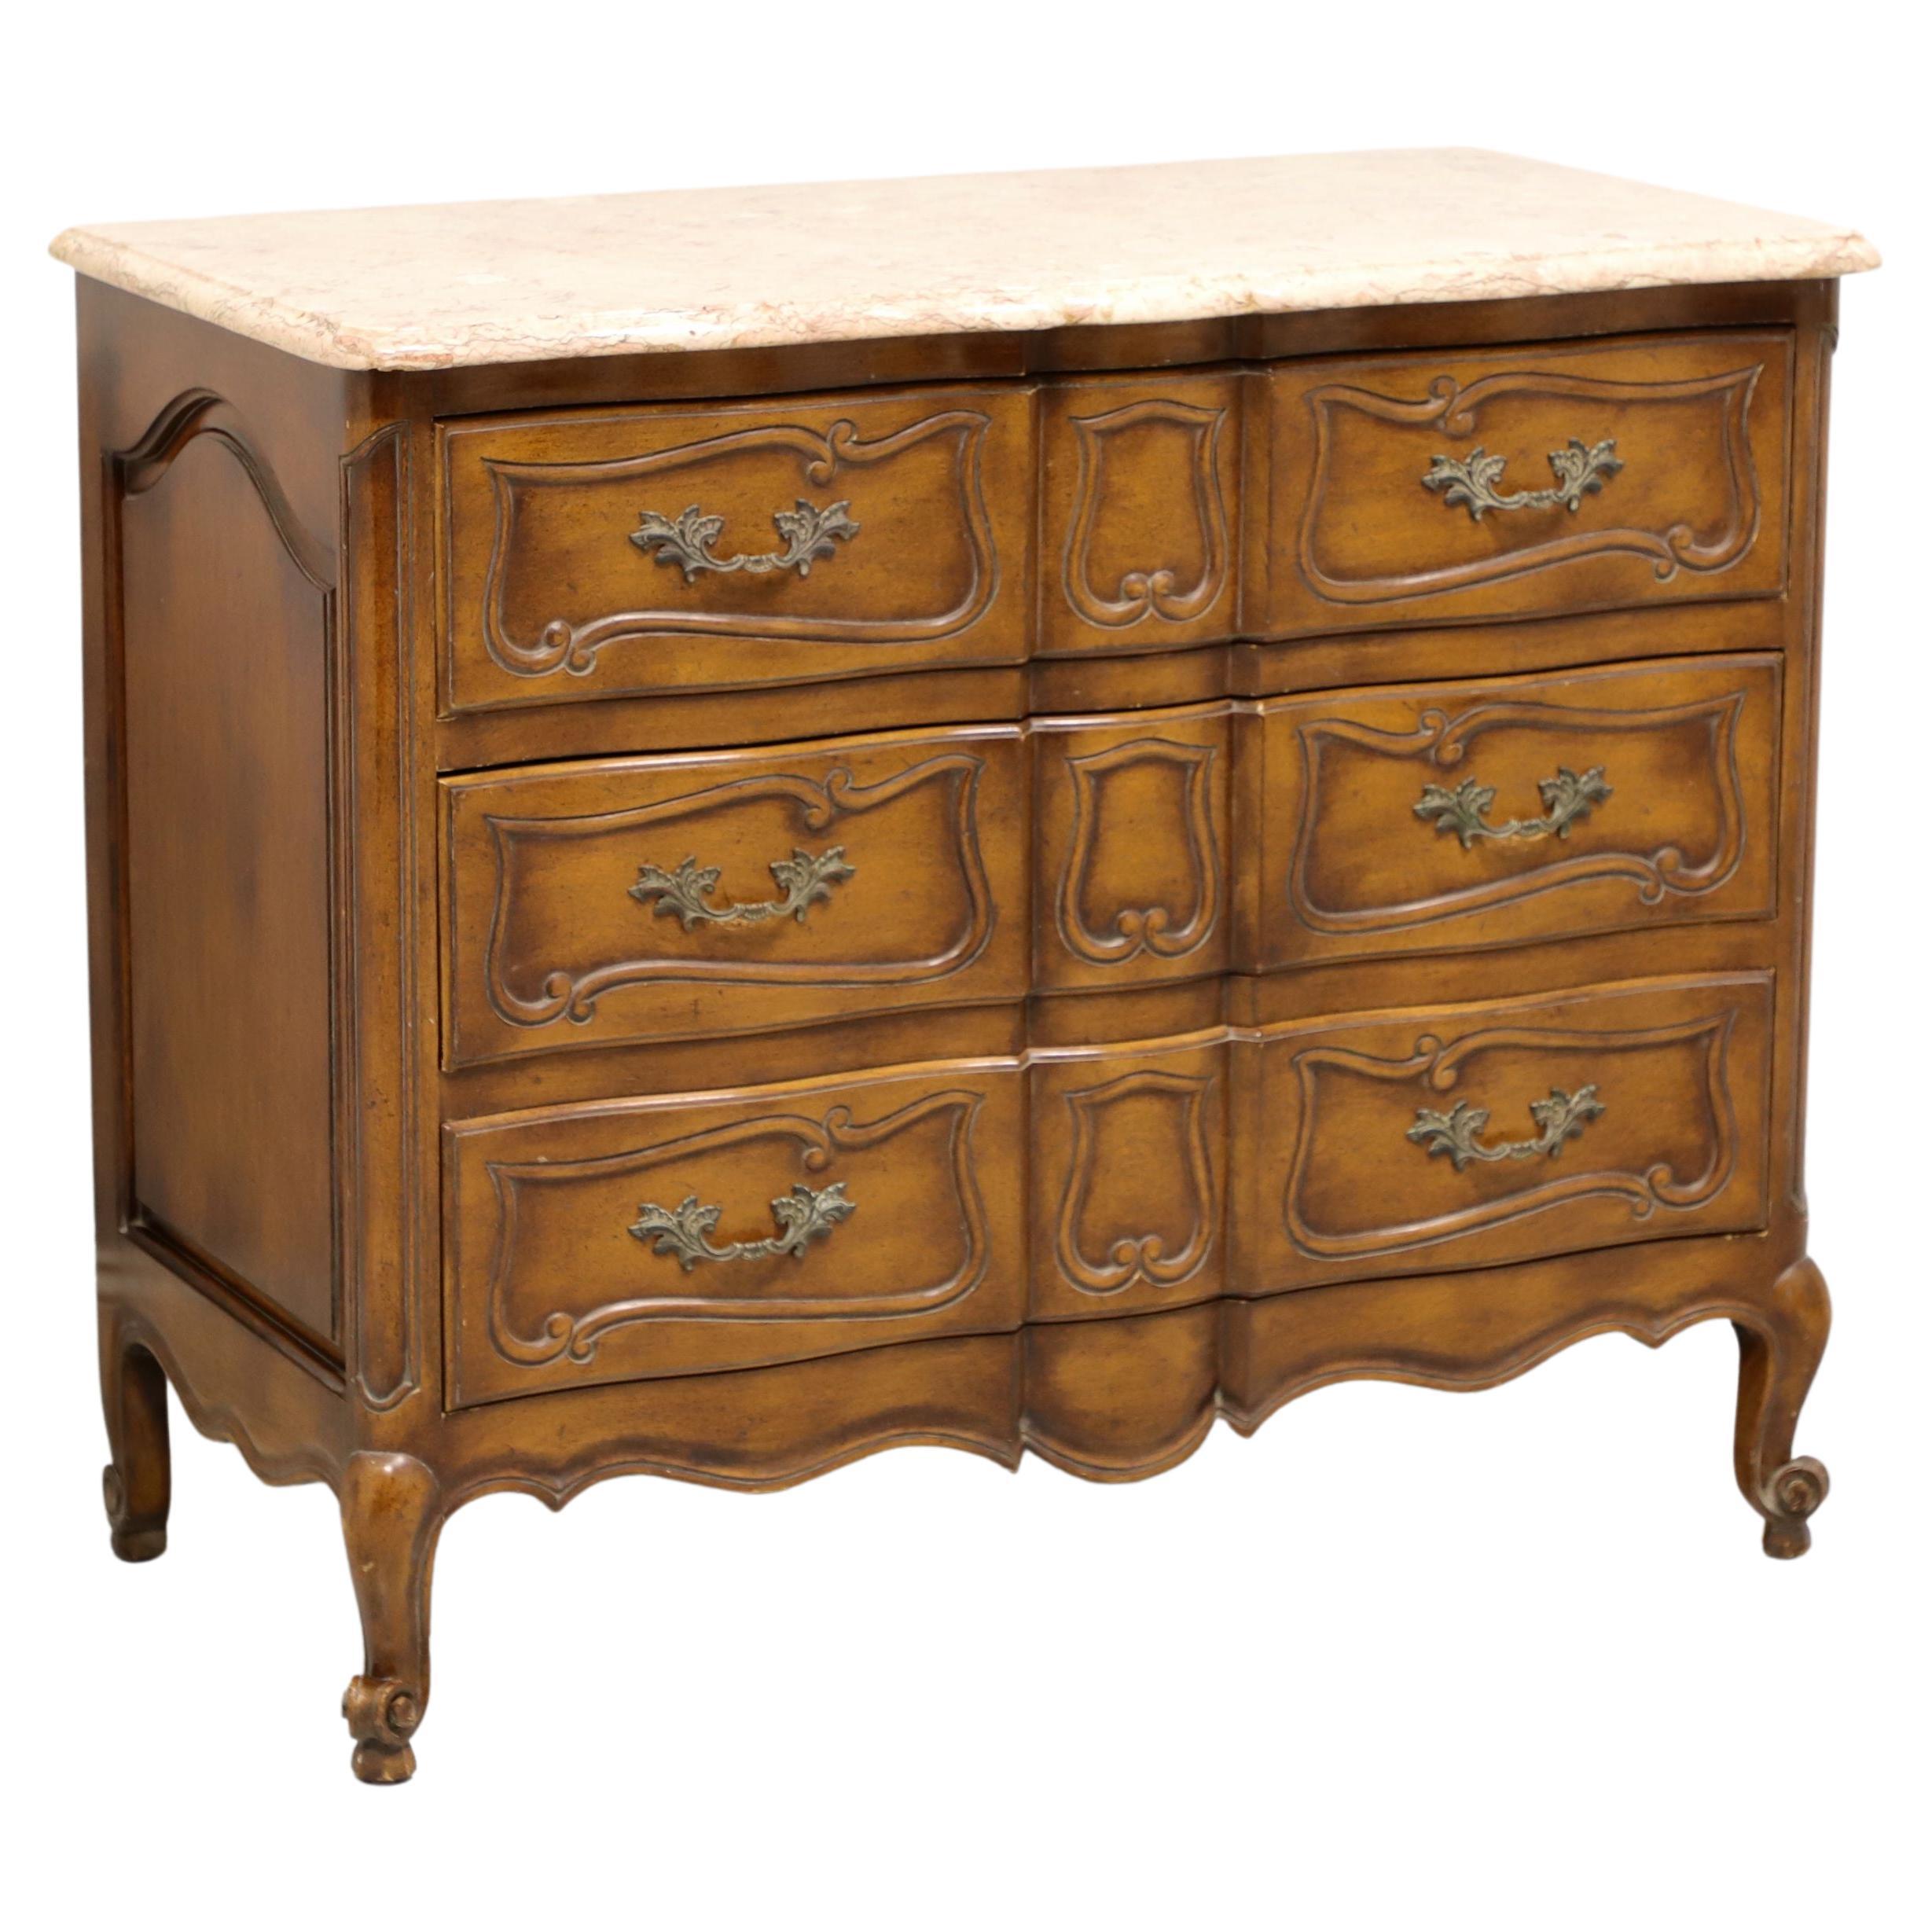 Vintage French Country Style Bachelor Chest with Marble Top - A